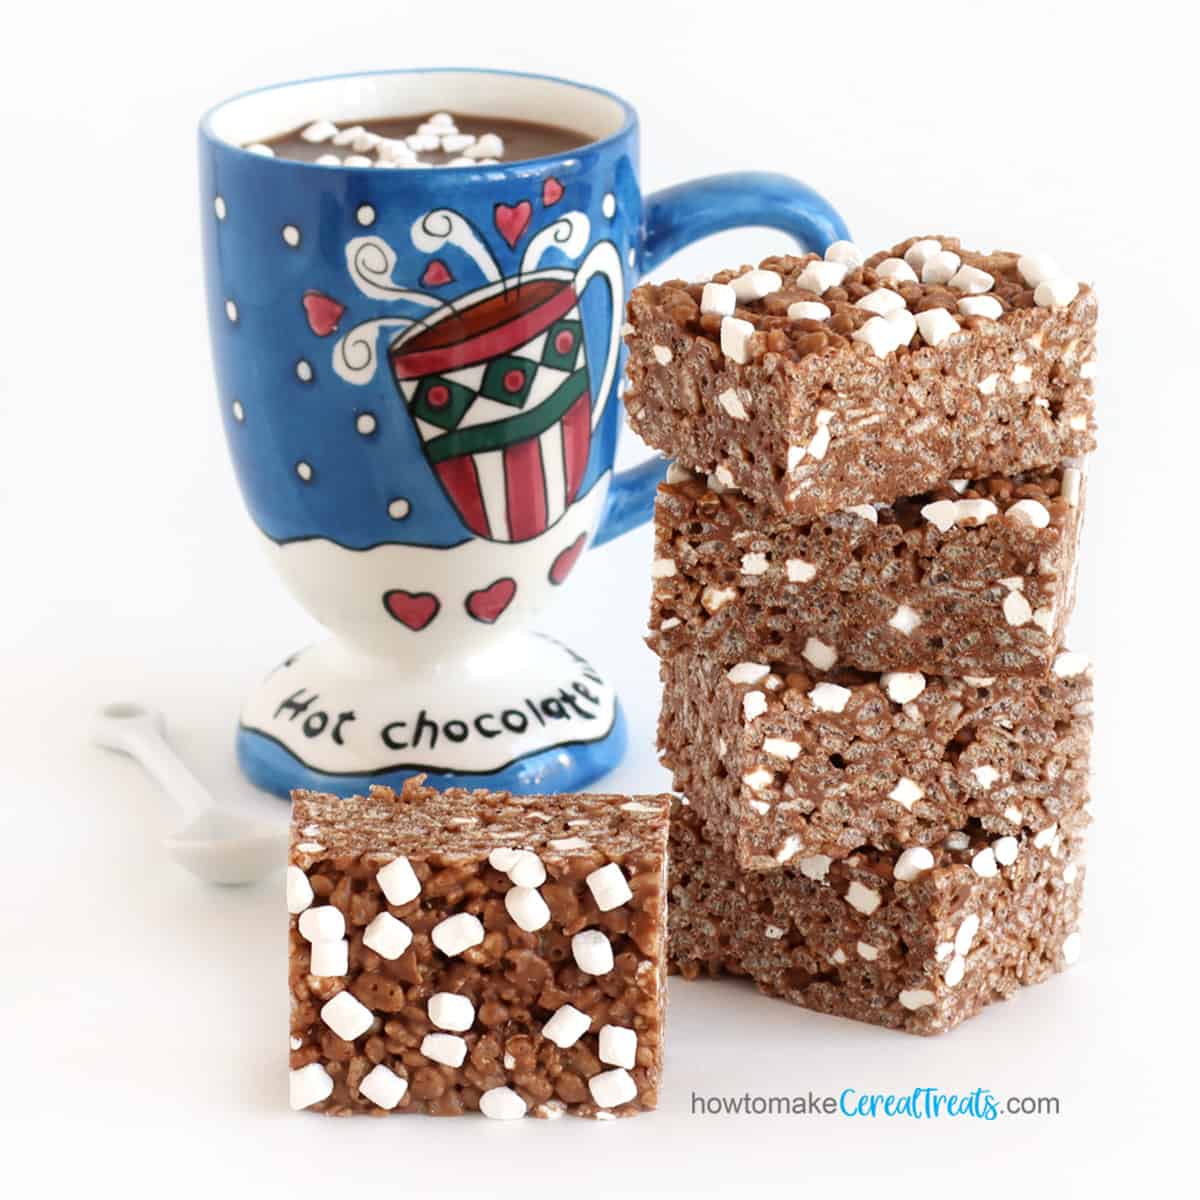 hot chocolate Rice Krispie treats stacked next to a mug of hot cocoa topped with tiny marshmallows.